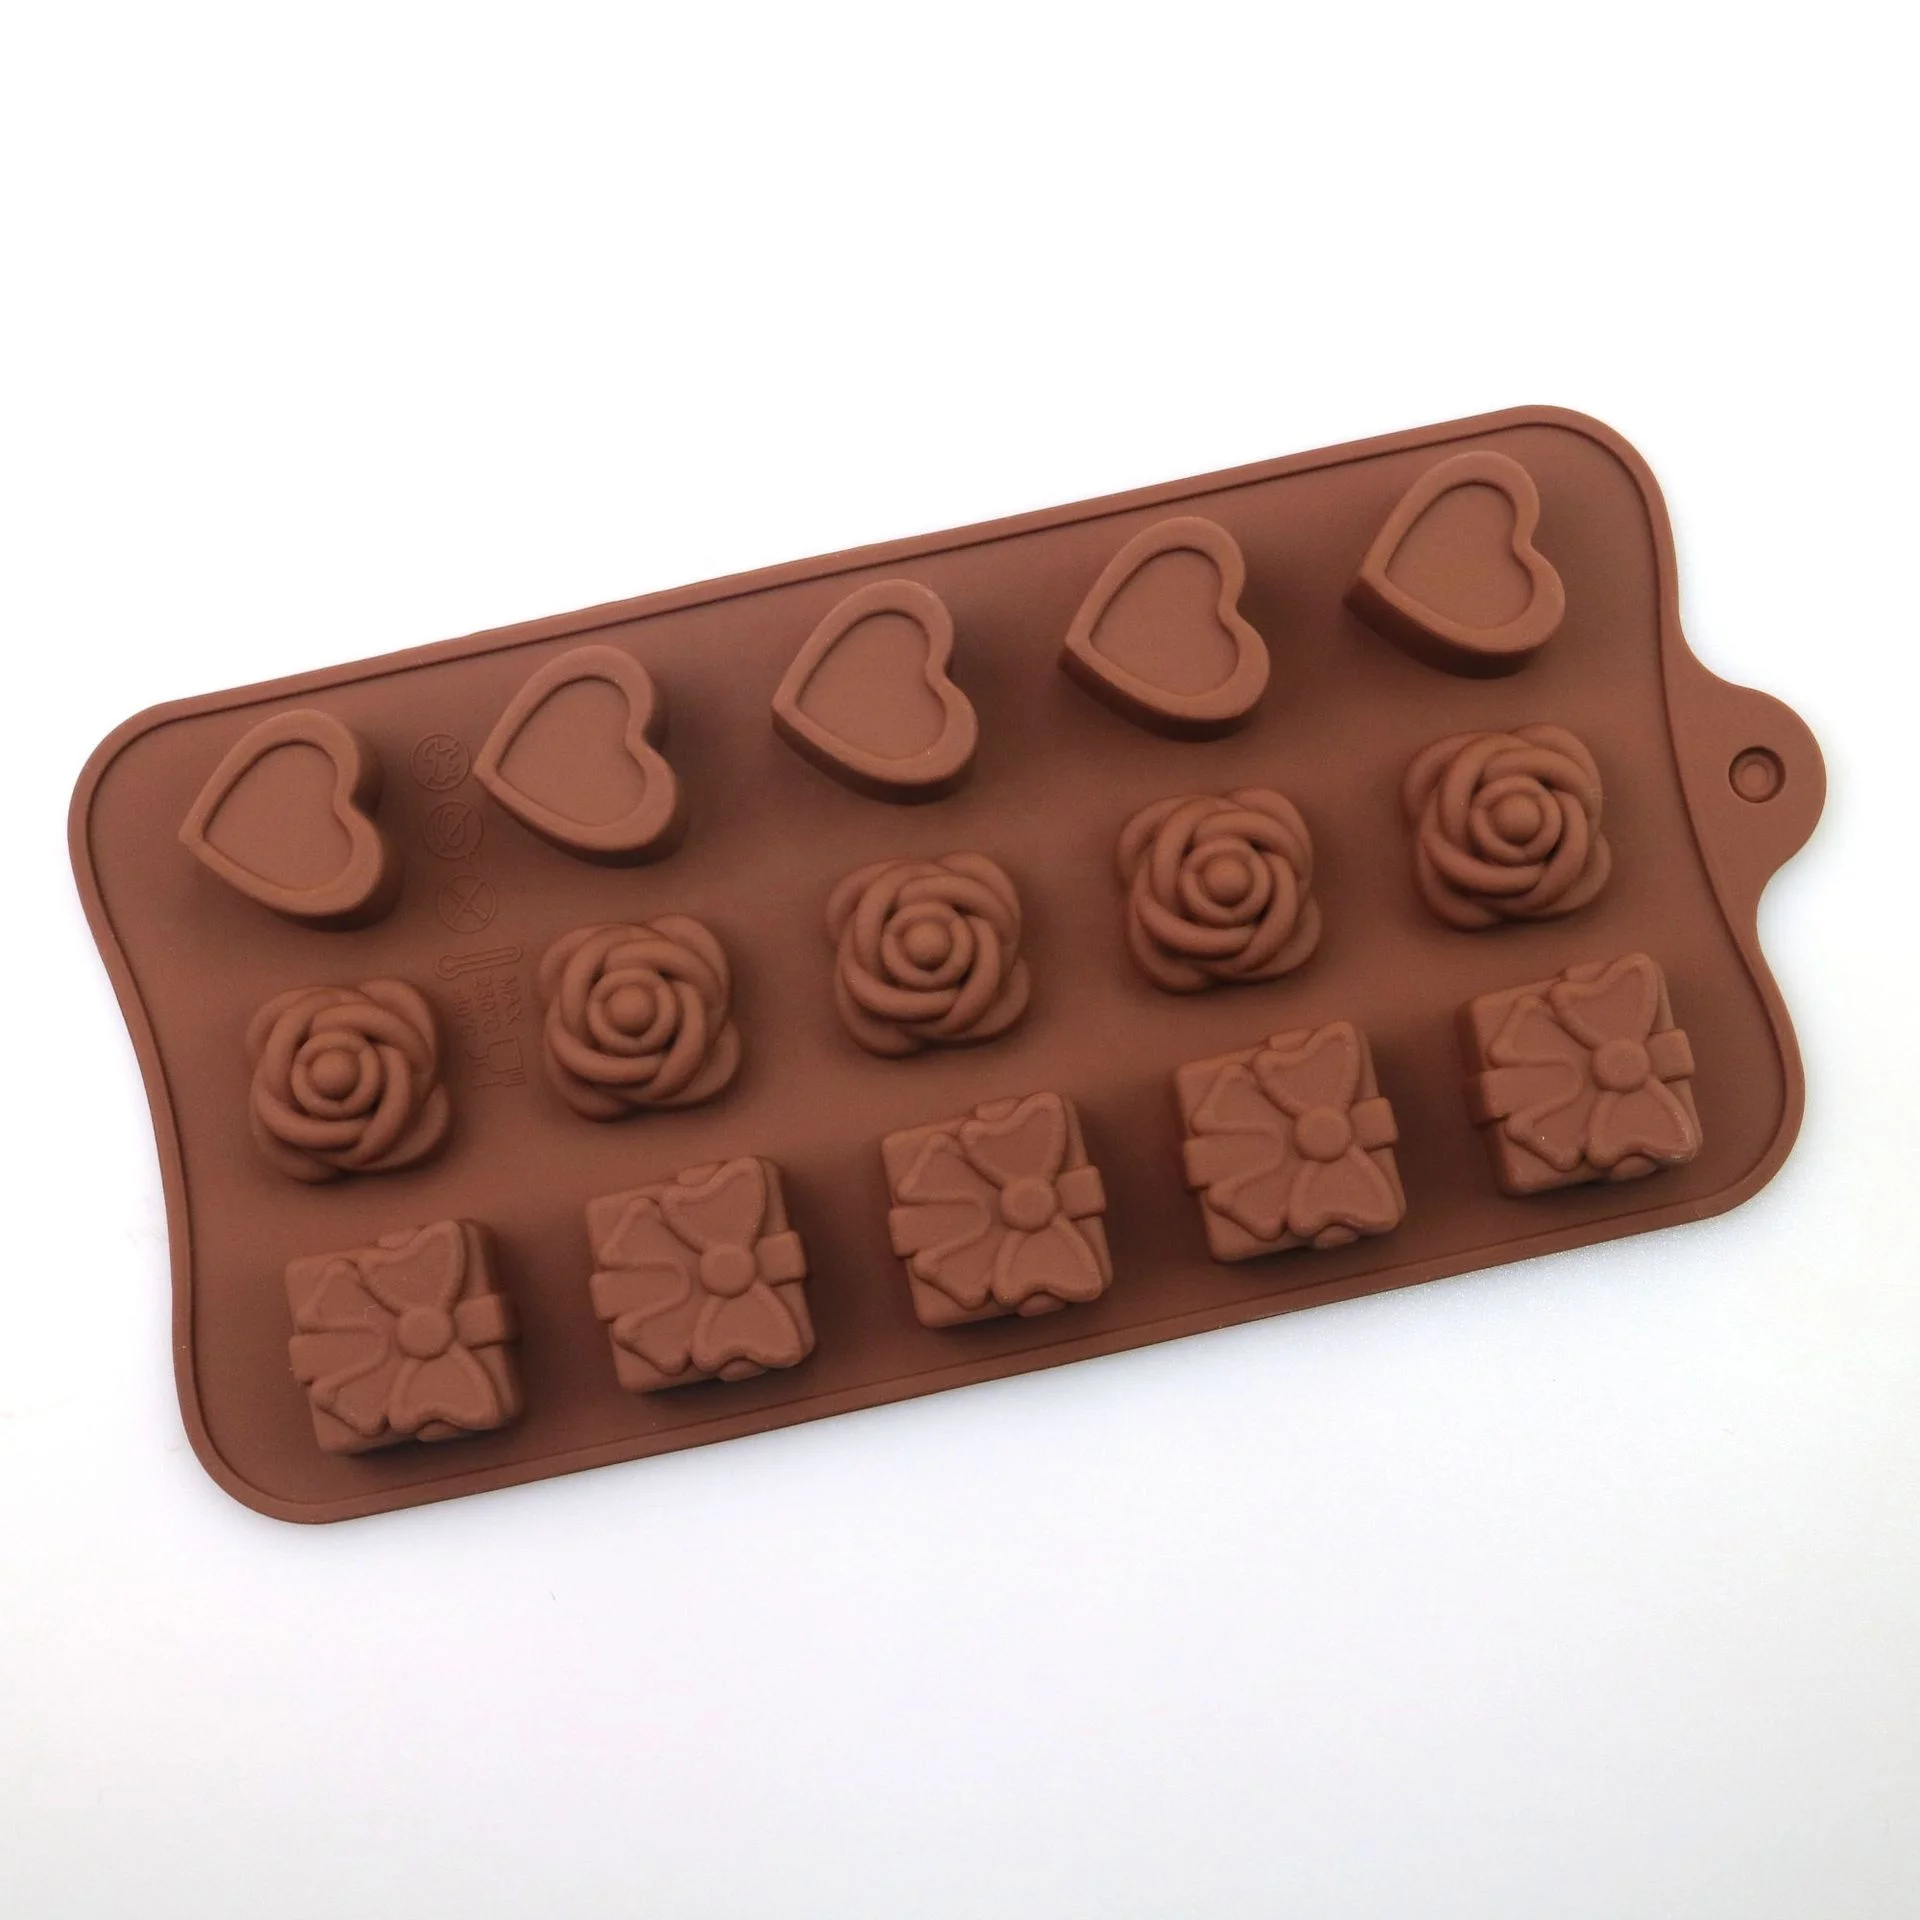 Valentine's Day styles baking chocolate candy mold love flower shaped silicone cake mold cake tools15 holes love shape cake mold